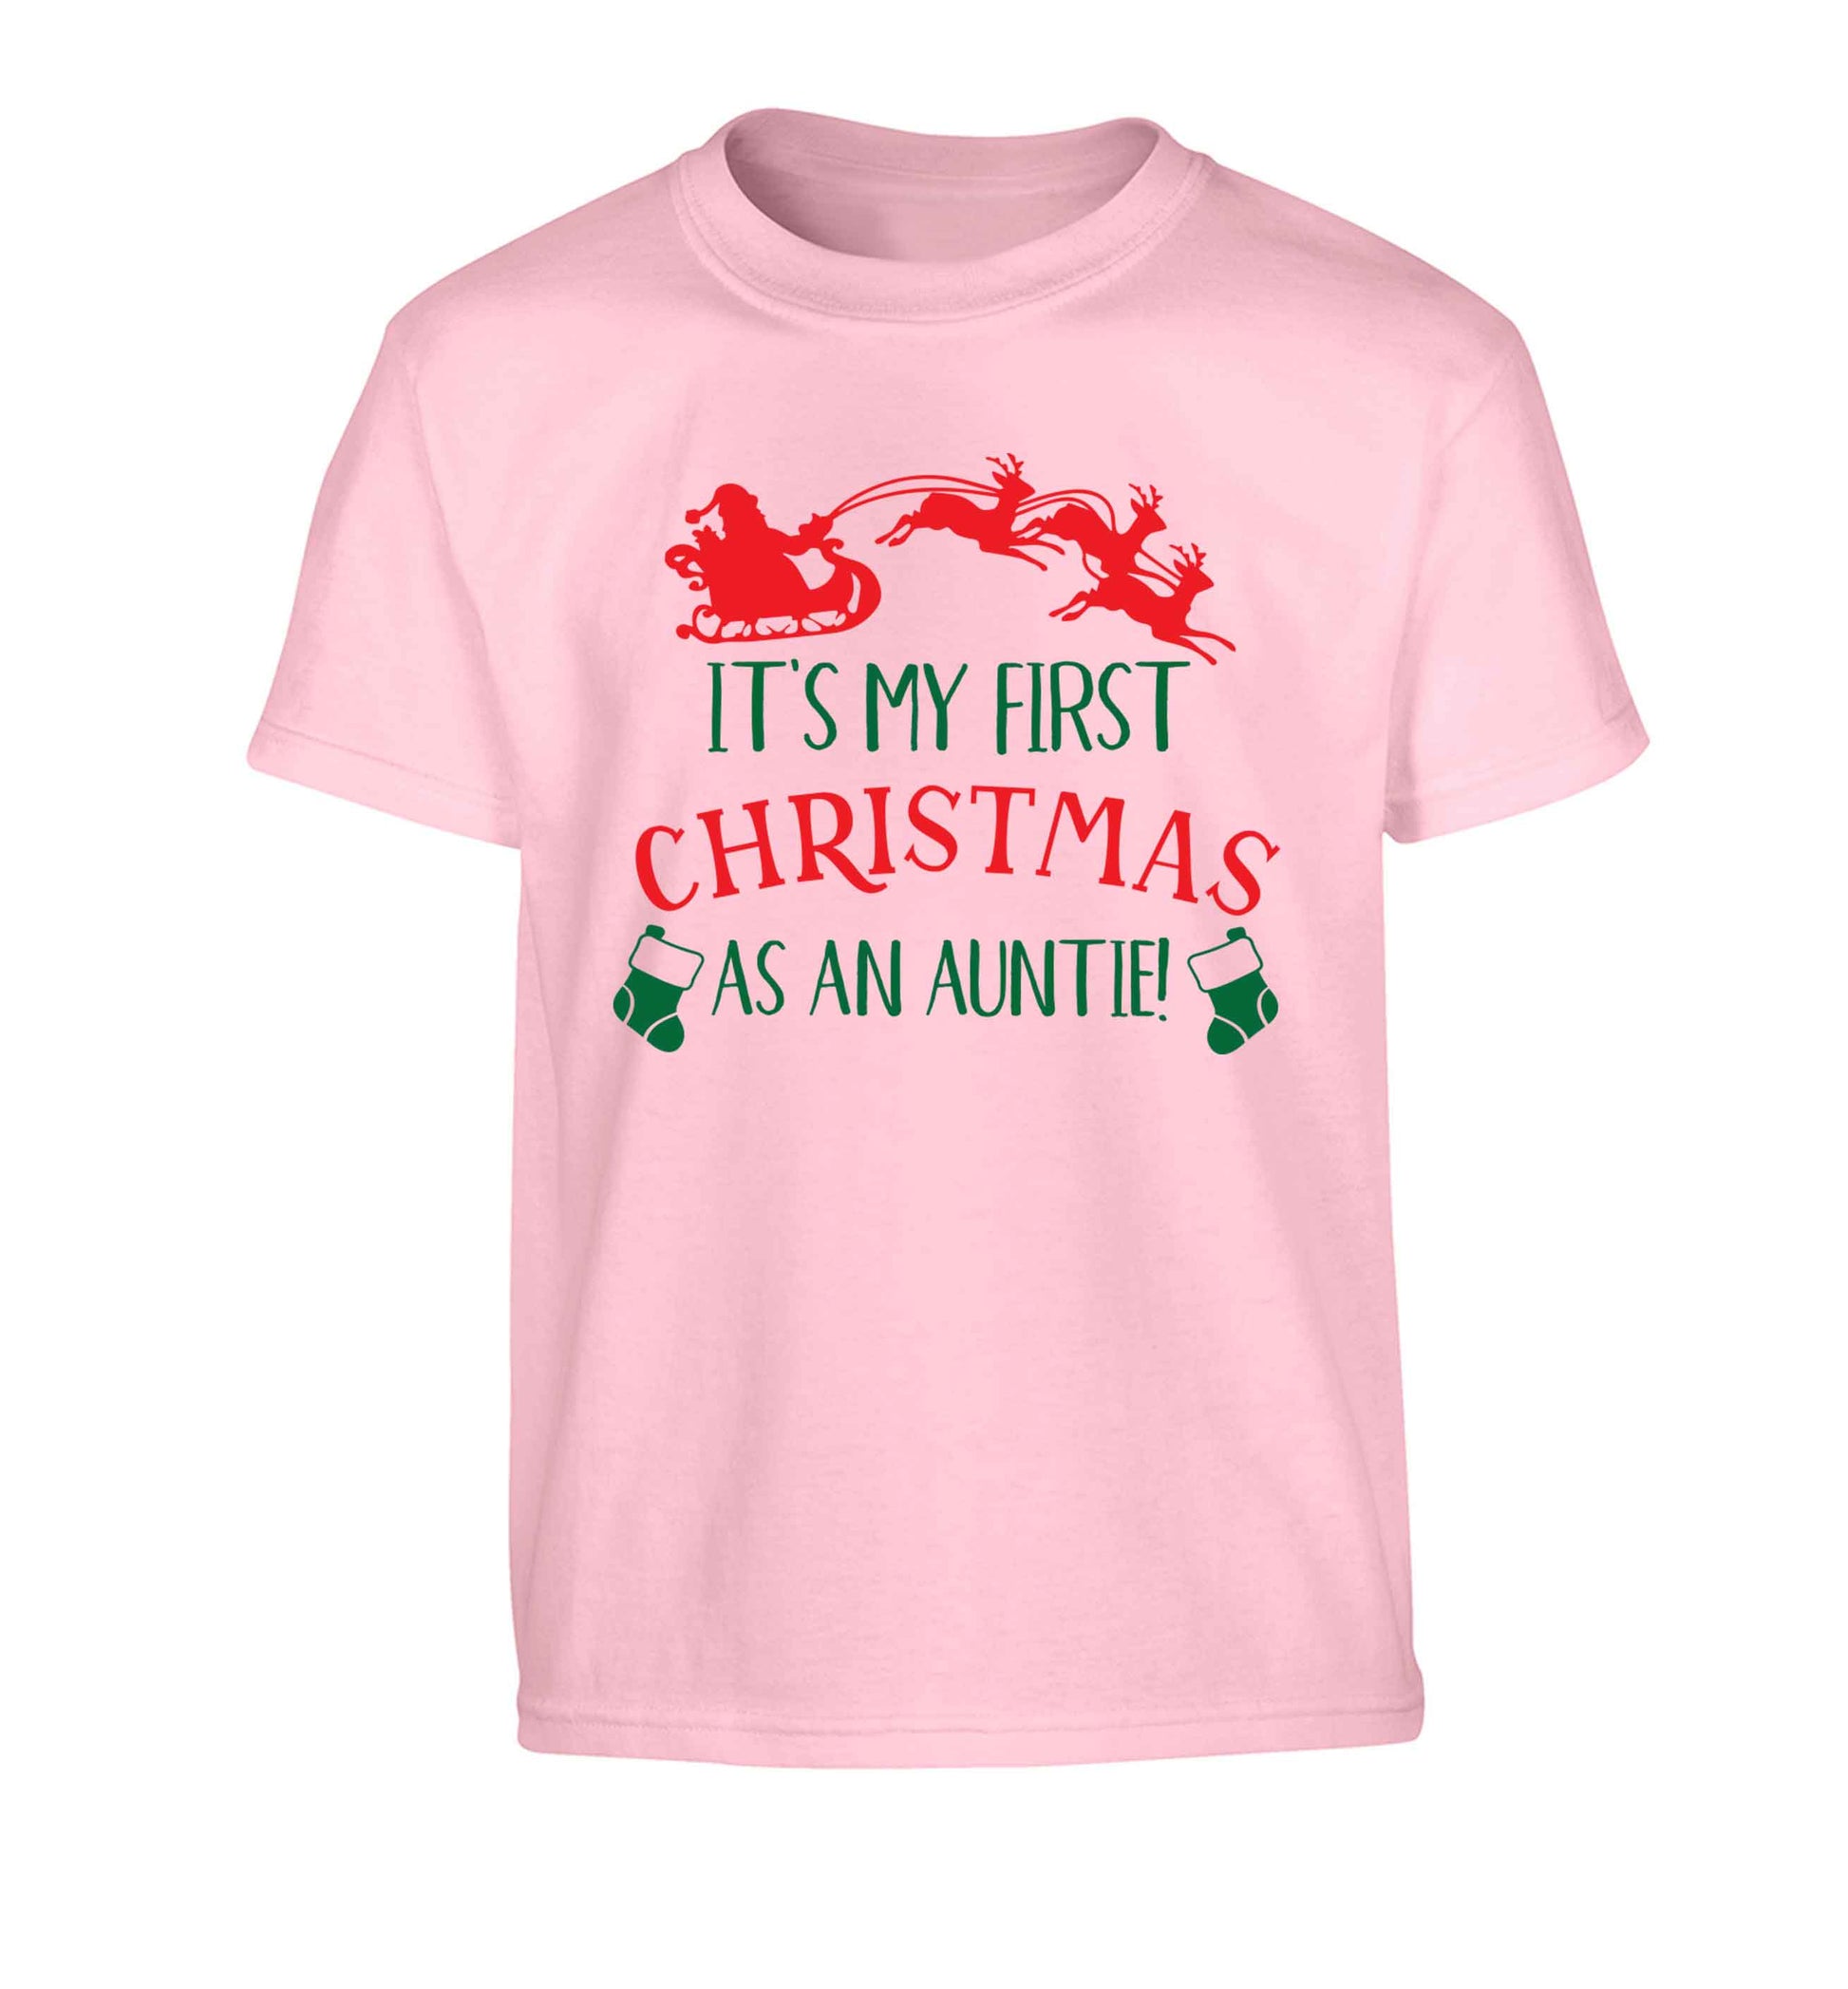 It's my first Christmas as an auntie! Children's light pink Tshirt 12-13 Years